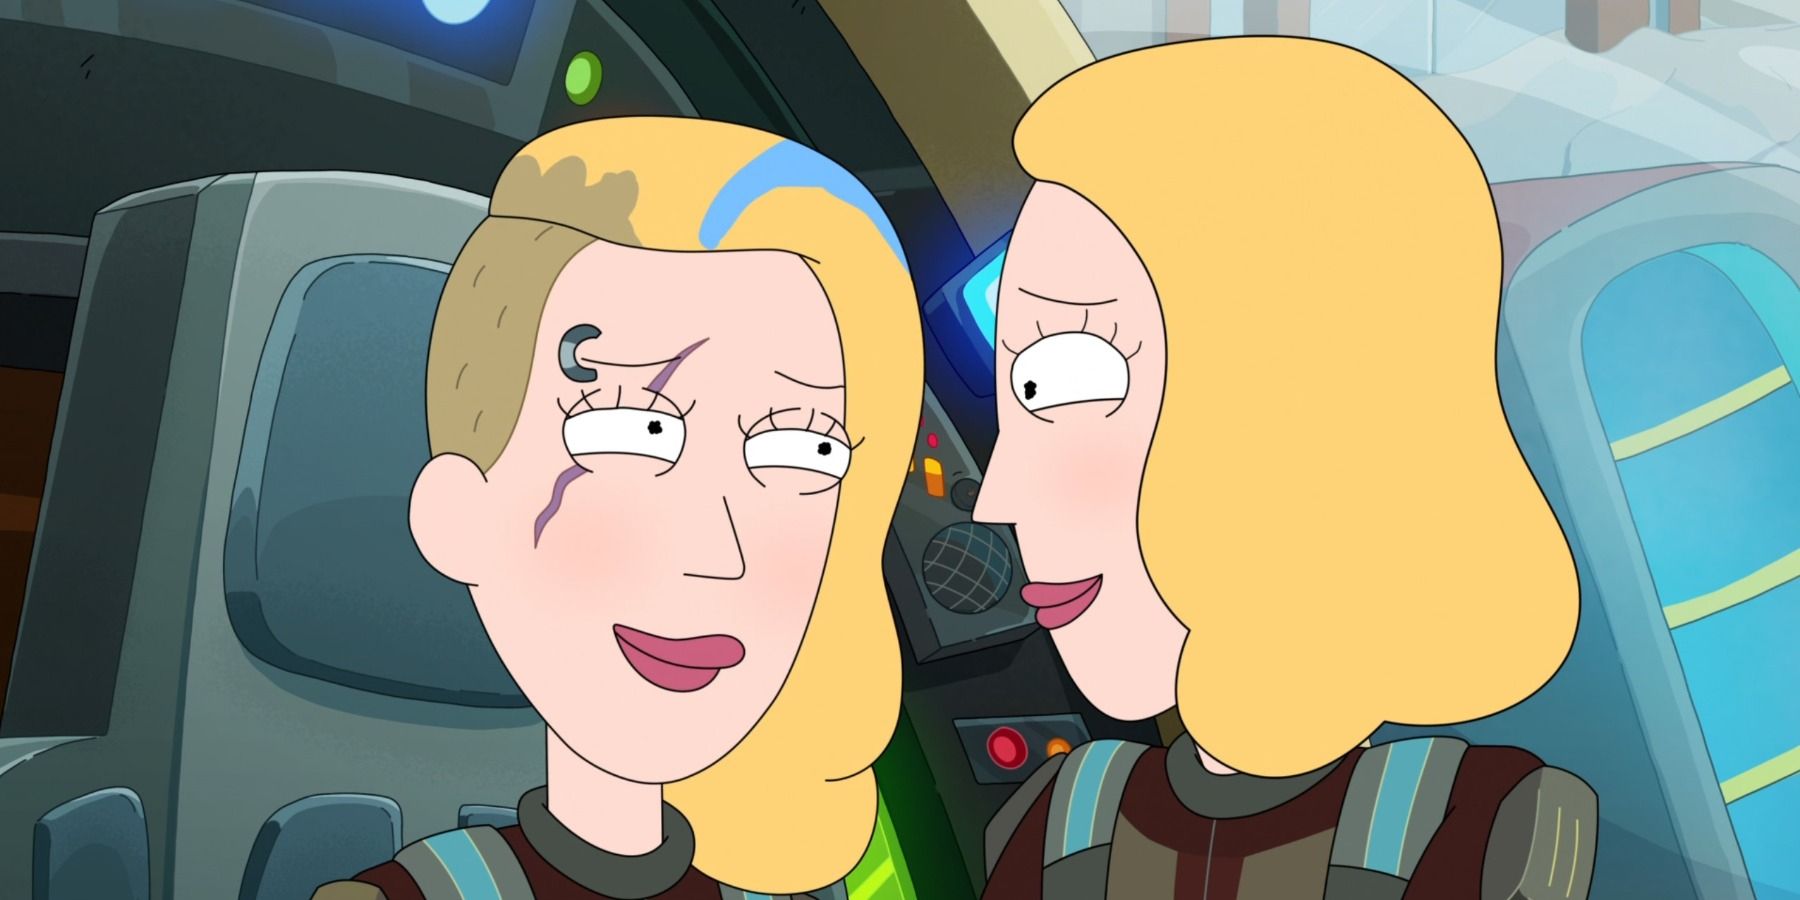 Space Beth and Clone Beth lesbian kiss in Rick and Morty